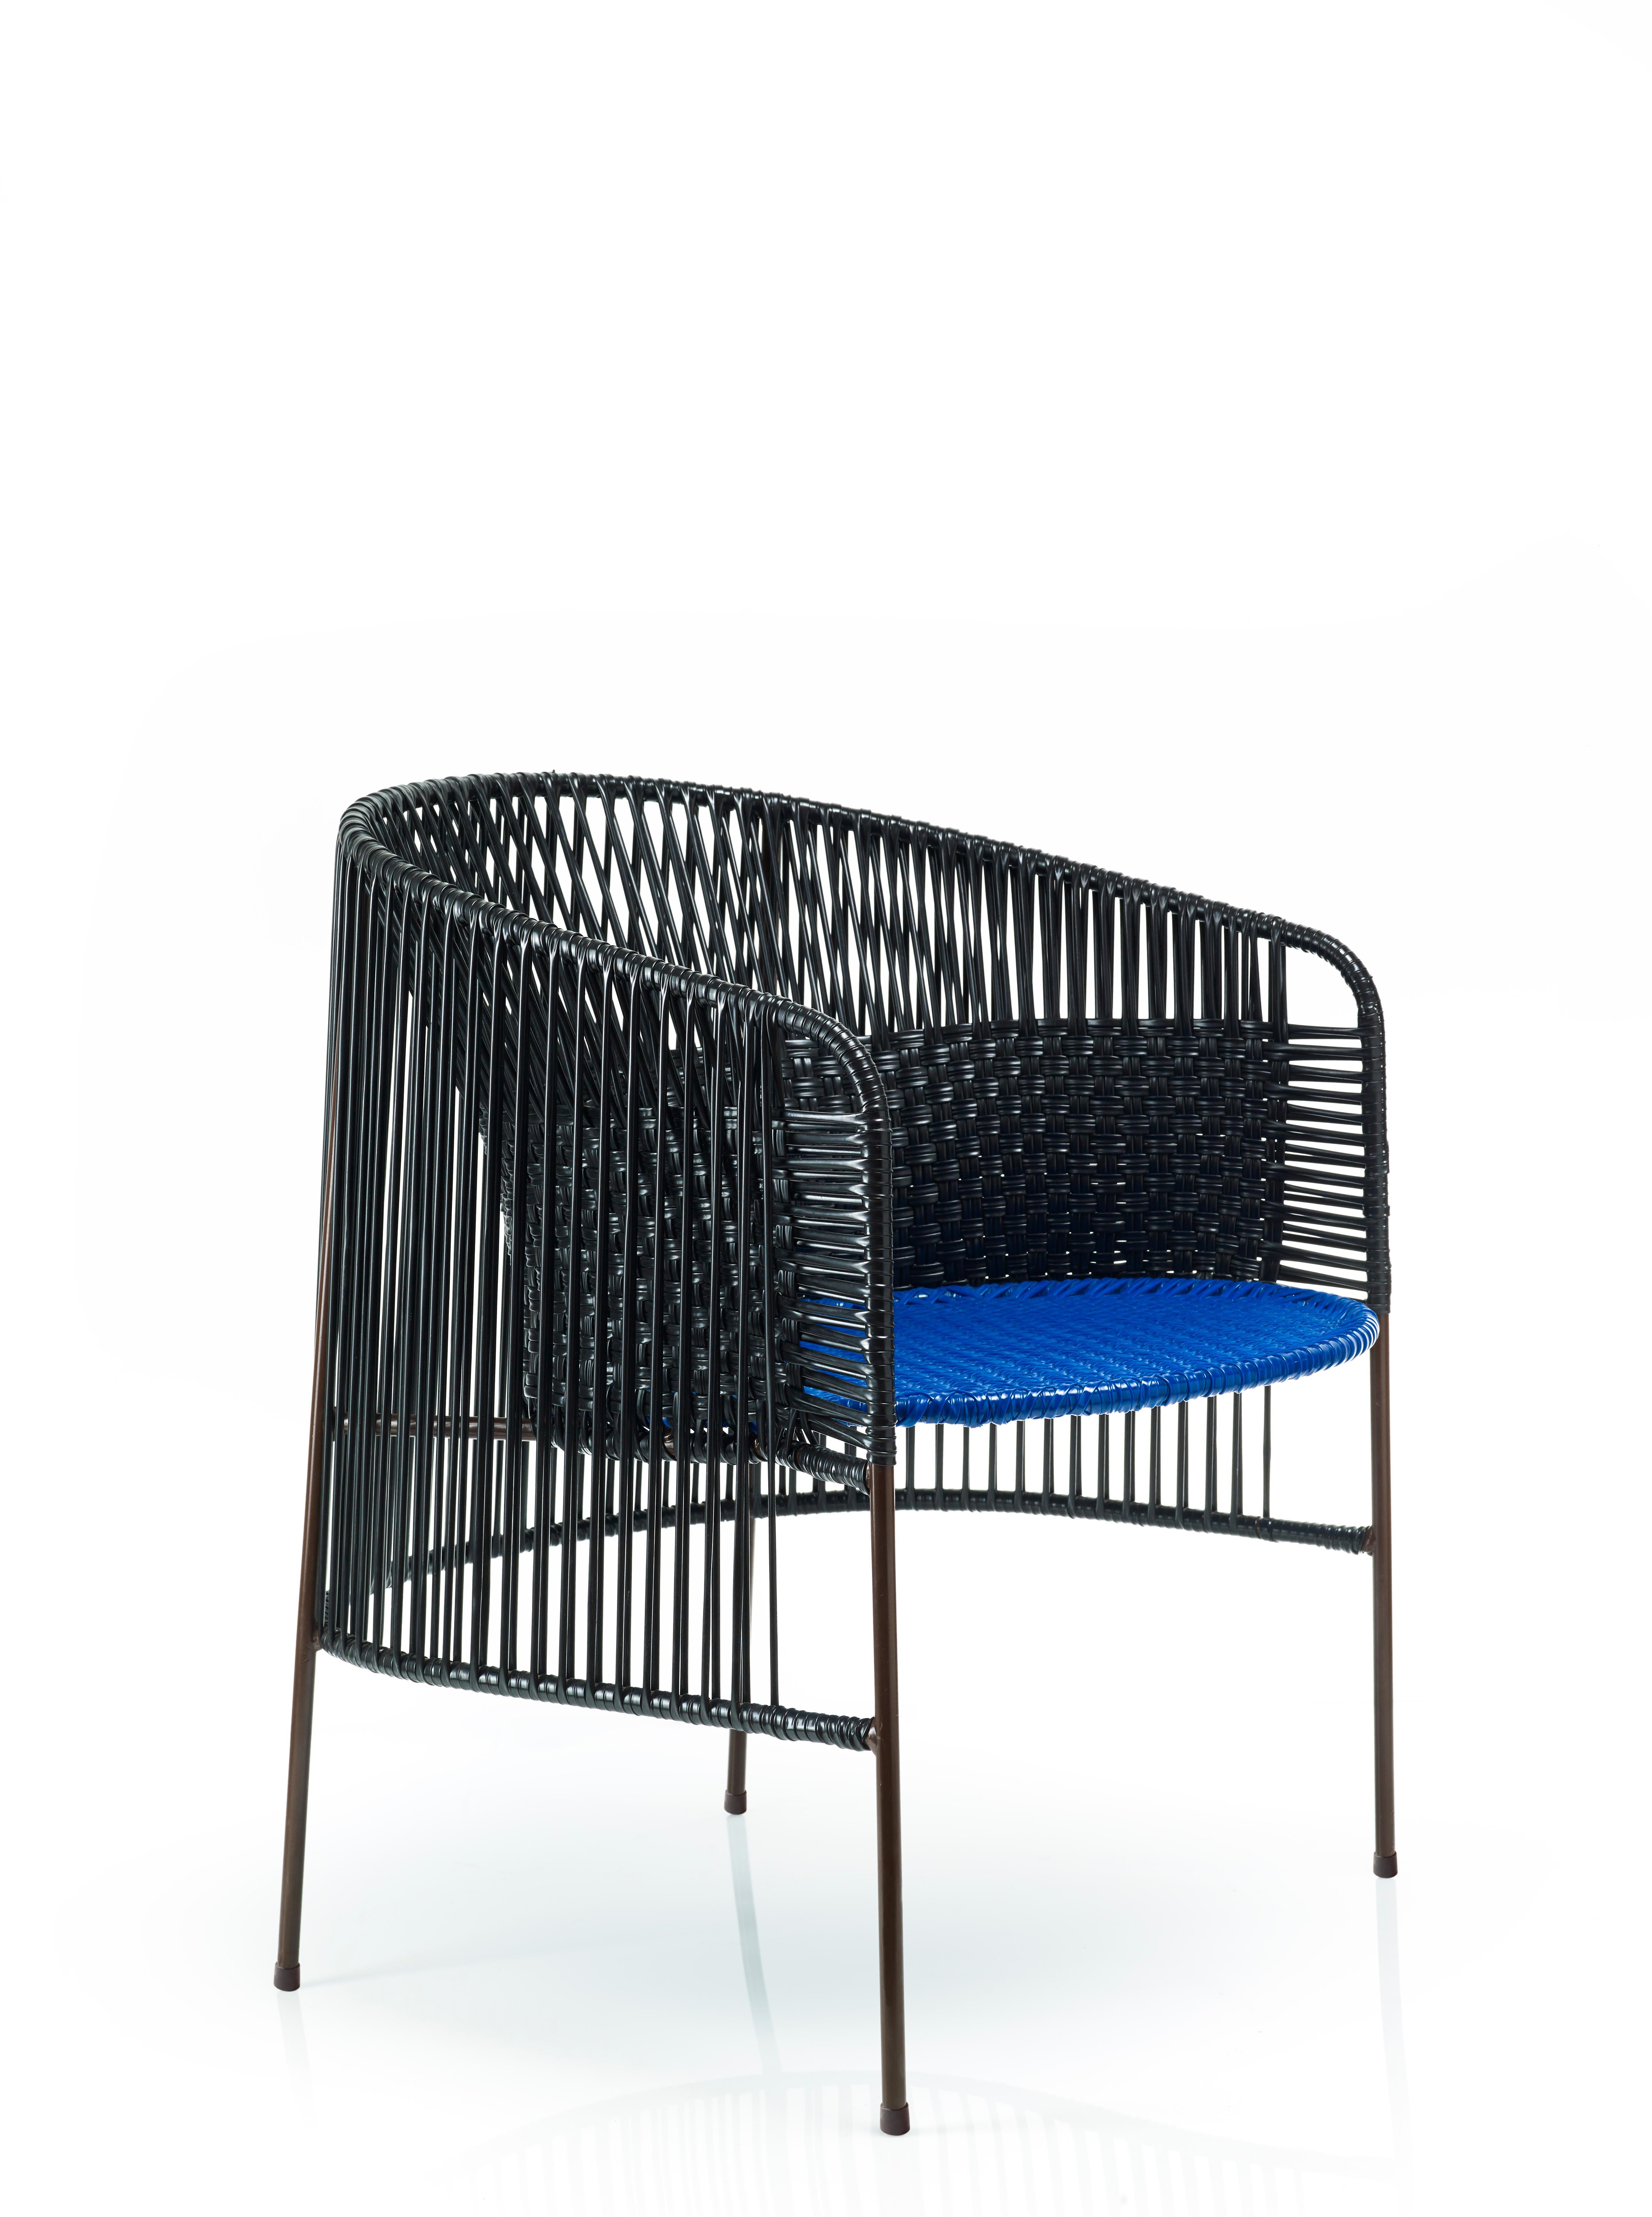 Set of 2 black caribe lounge chair by Sebastian Herkner.
Materials: galvanized and powder-coated tubular steel. PVC strings are made from recycled plastic.
Technique: Made from recycled plastic and weaved by local craftspeople in Colombia.